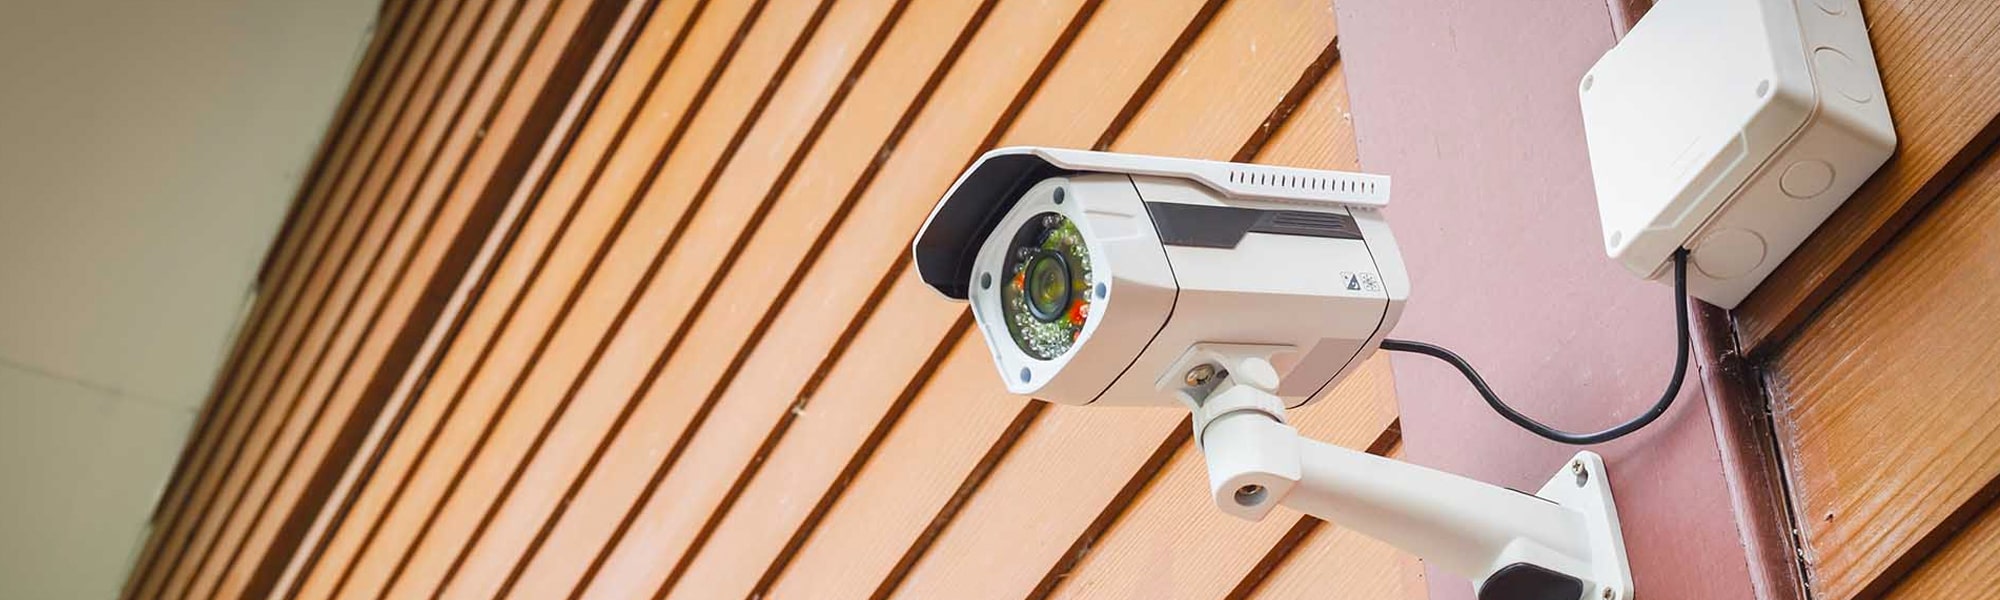 high quality alarm and CCTV installations